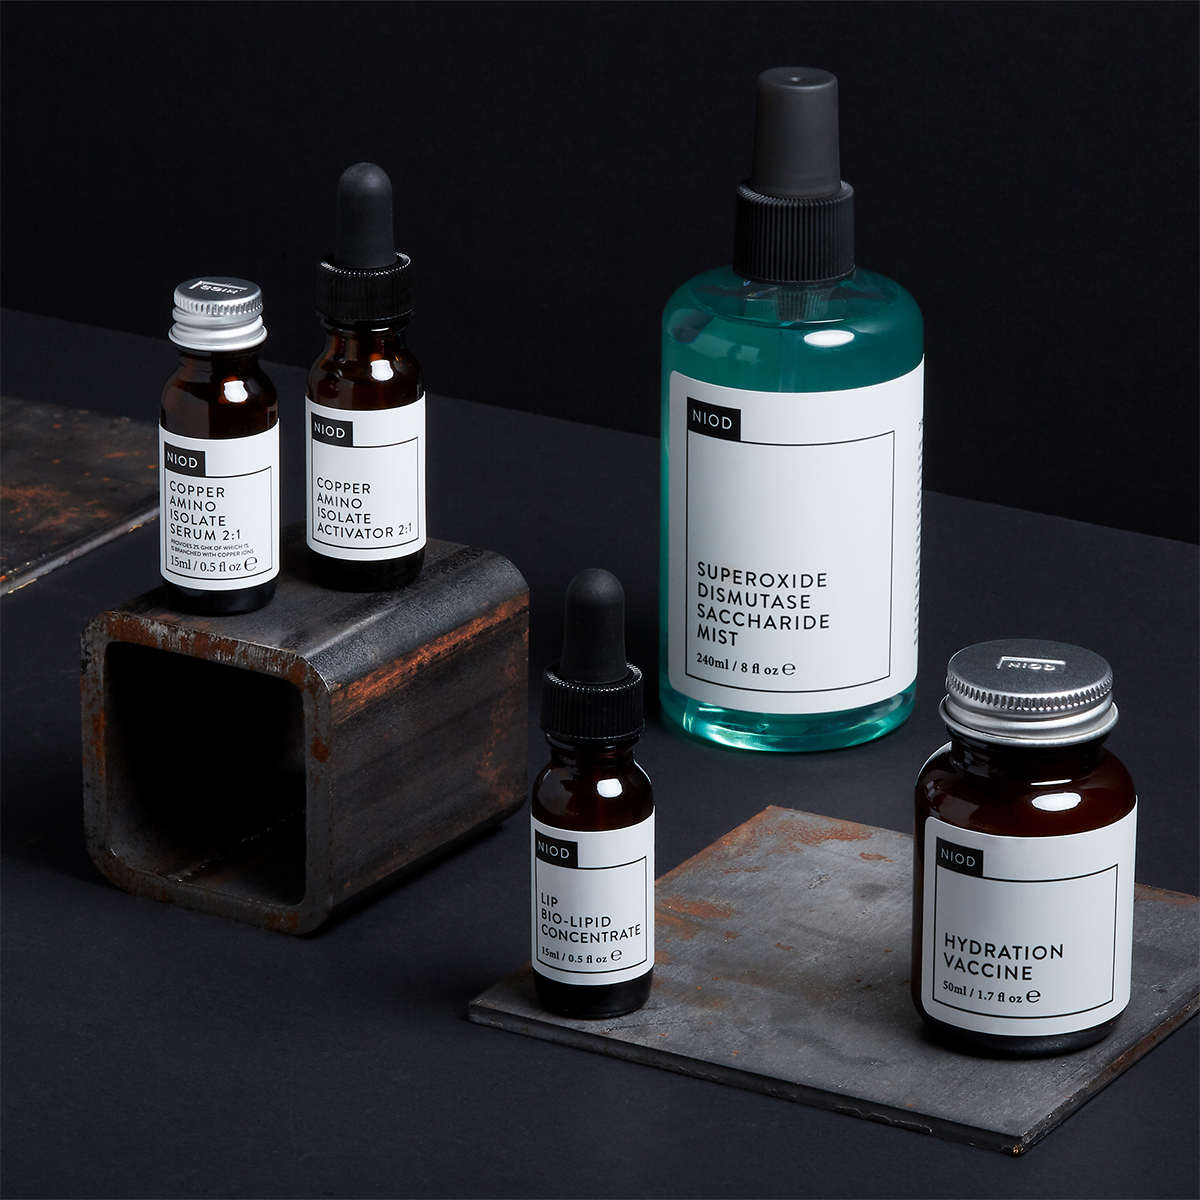 Niod Fractionated Eye-Contour Concentrate